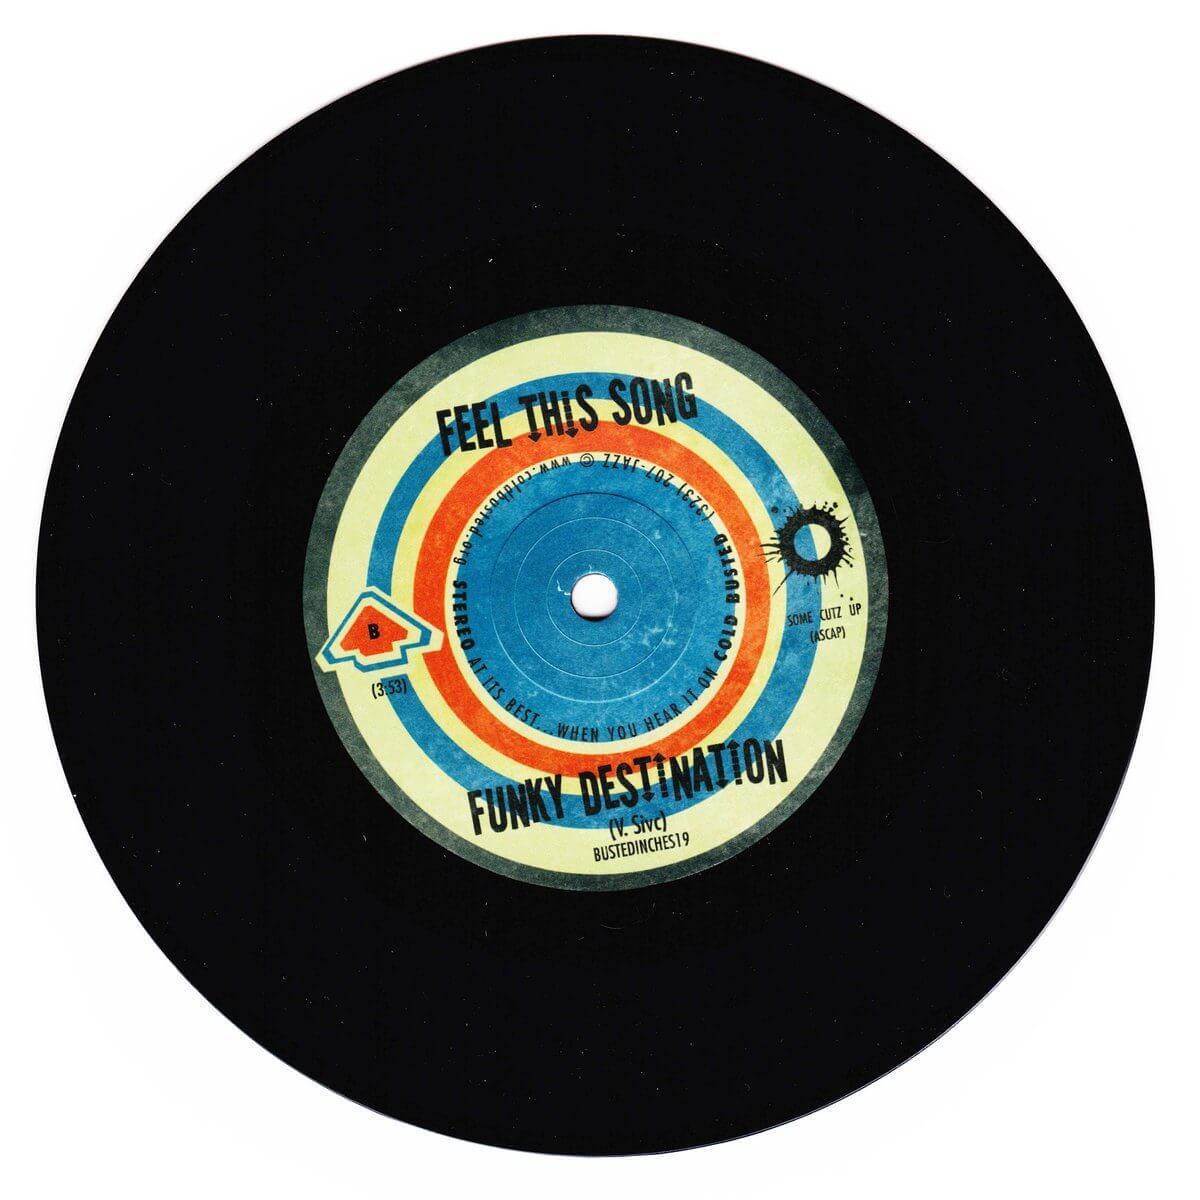 Funky Destination - Gonna Give Ya Something To Funk On - Mama Used To Tell Me / Feel This Song 7 Inch Vinyl - Cold Busted